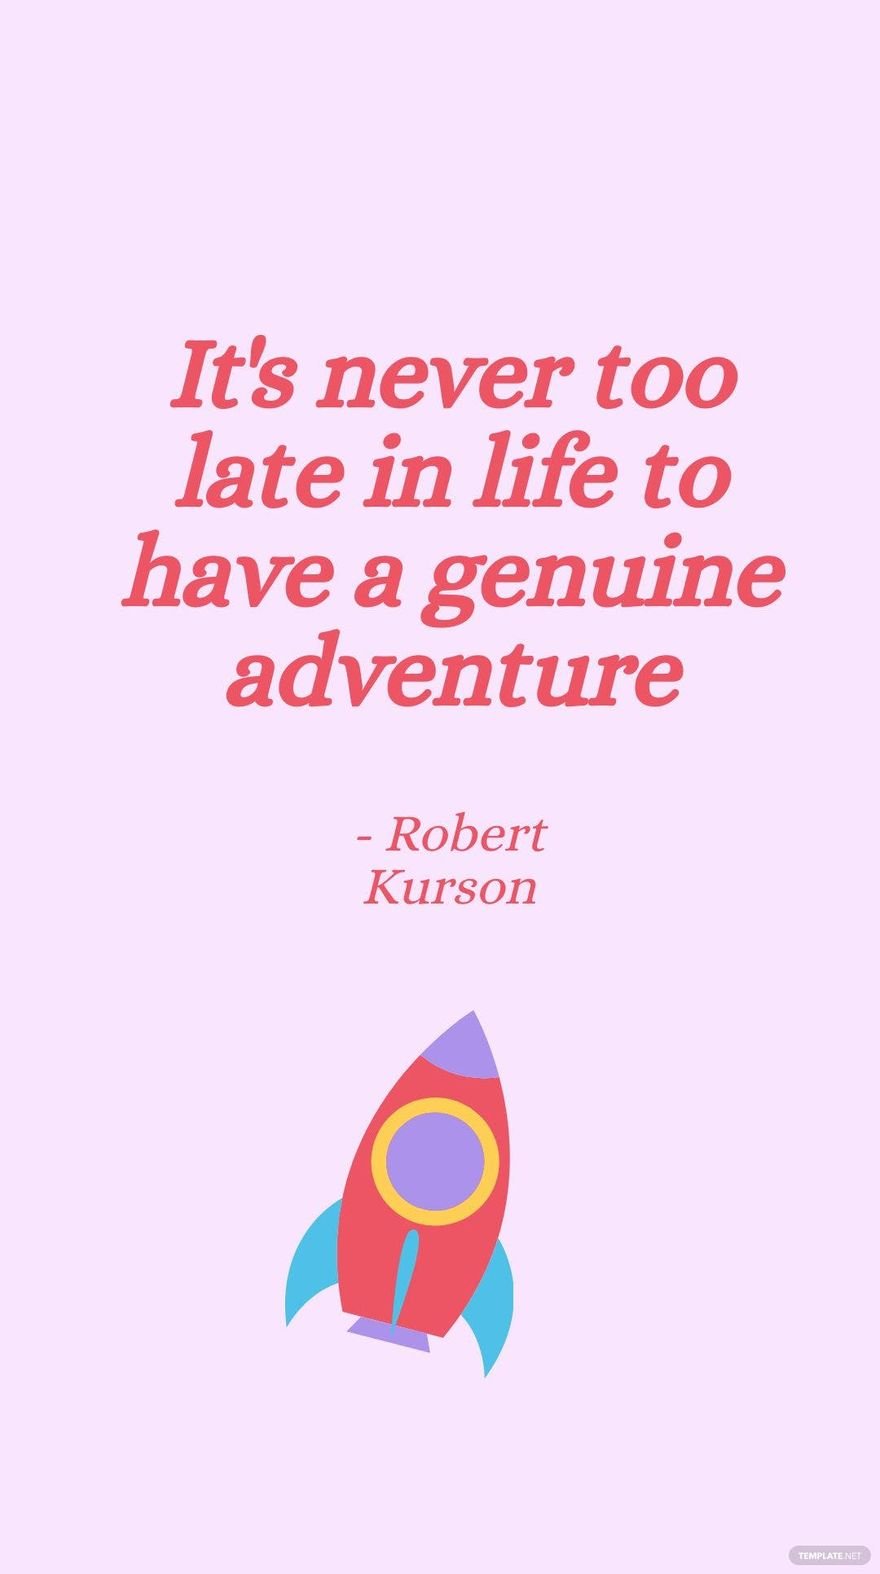 Free Robert Kurson - It's never too late in life to have a genuine adventure in JPG